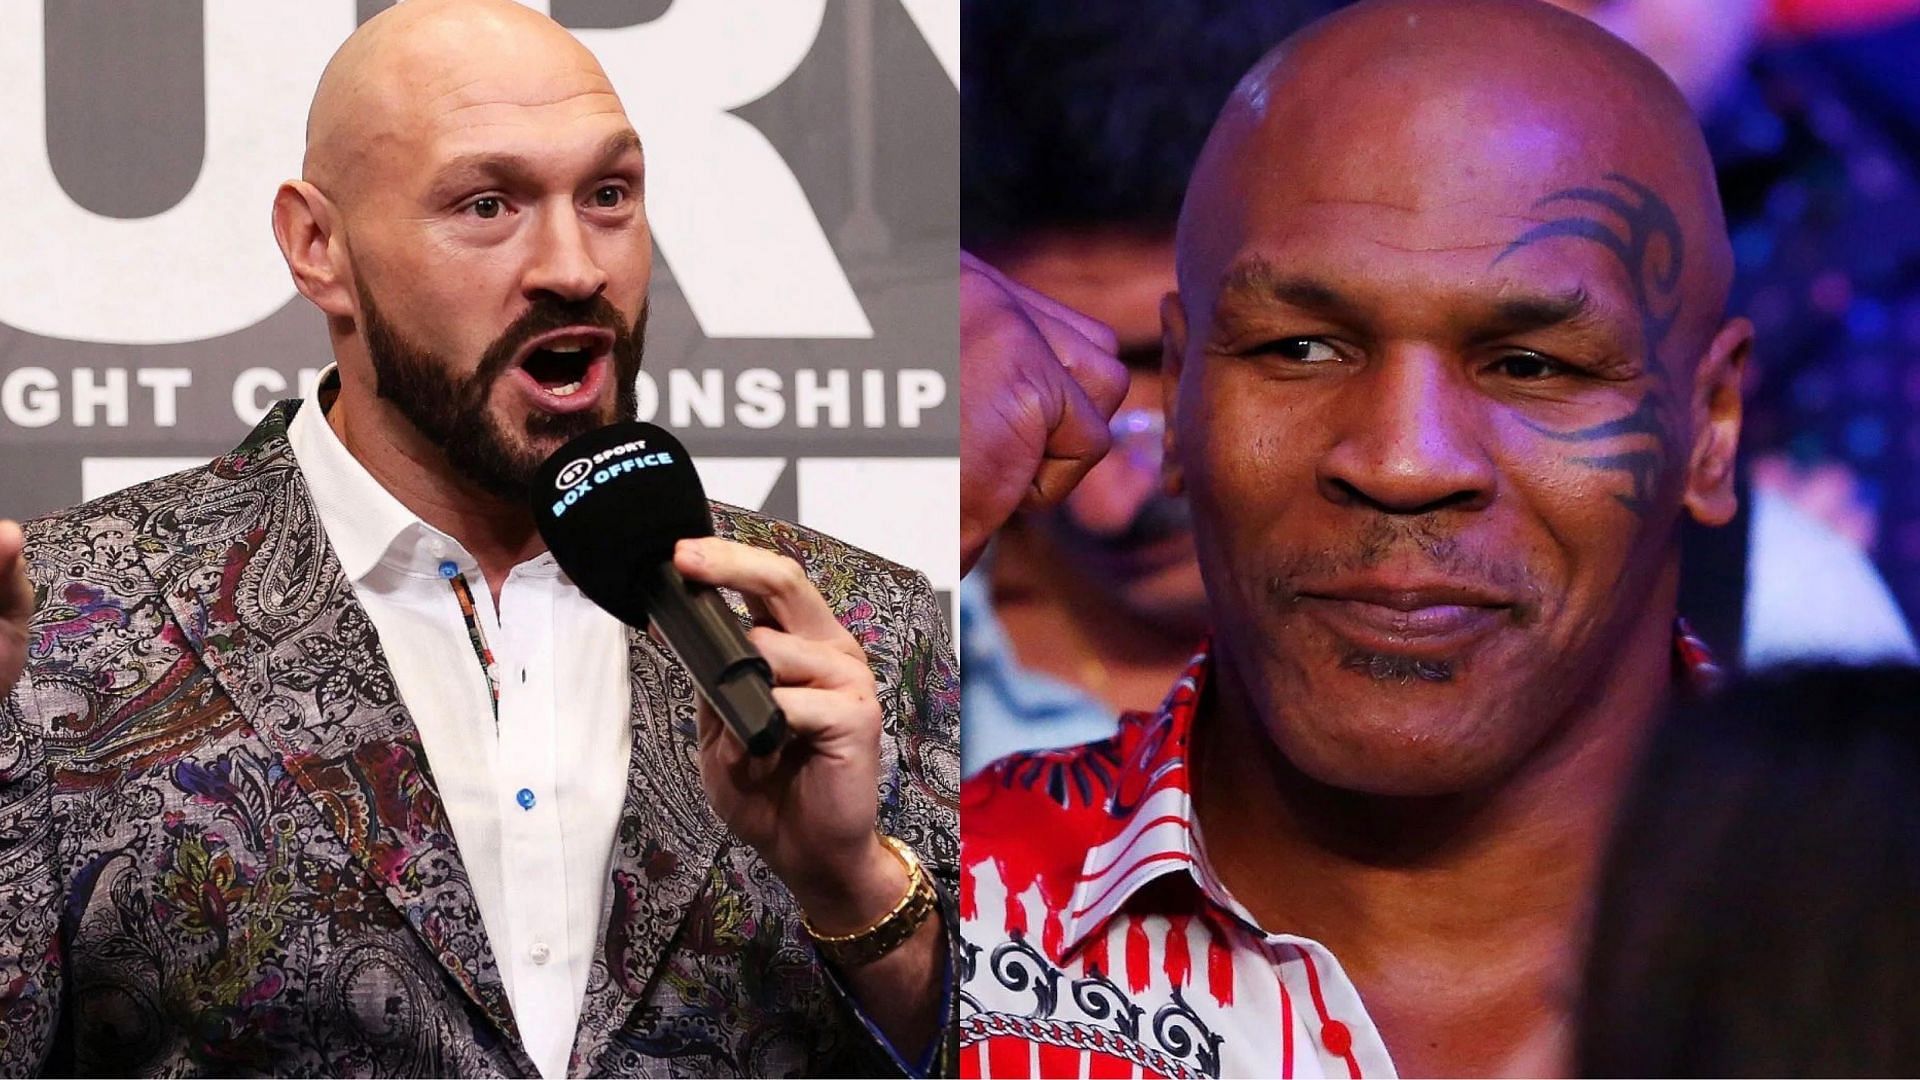 Tyson Fury (left), Mike Tyson (right) [Images courtesy of Getty]